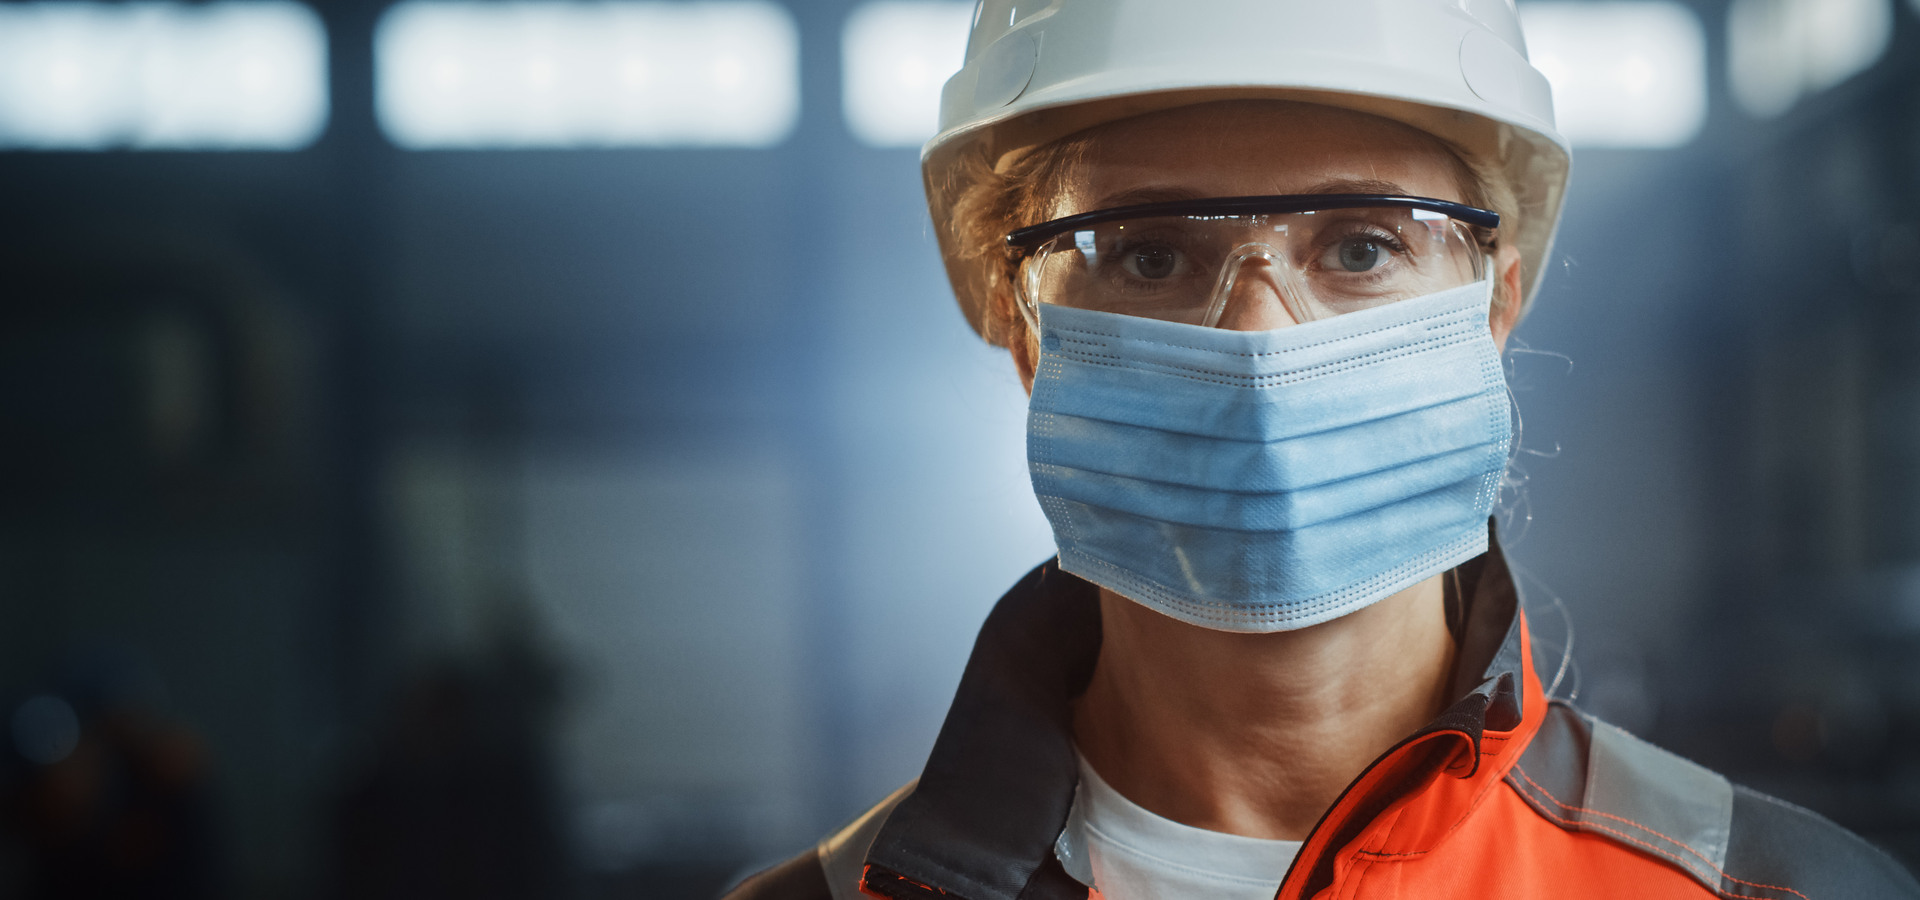 Portrait of a Professional Heavy Industry Engineer Worker Wearing on Safety Face Mask in a Steel Factory. Beautiful Female Industrial Specialist in Hard Hat Standing in Metal Construction Facility.